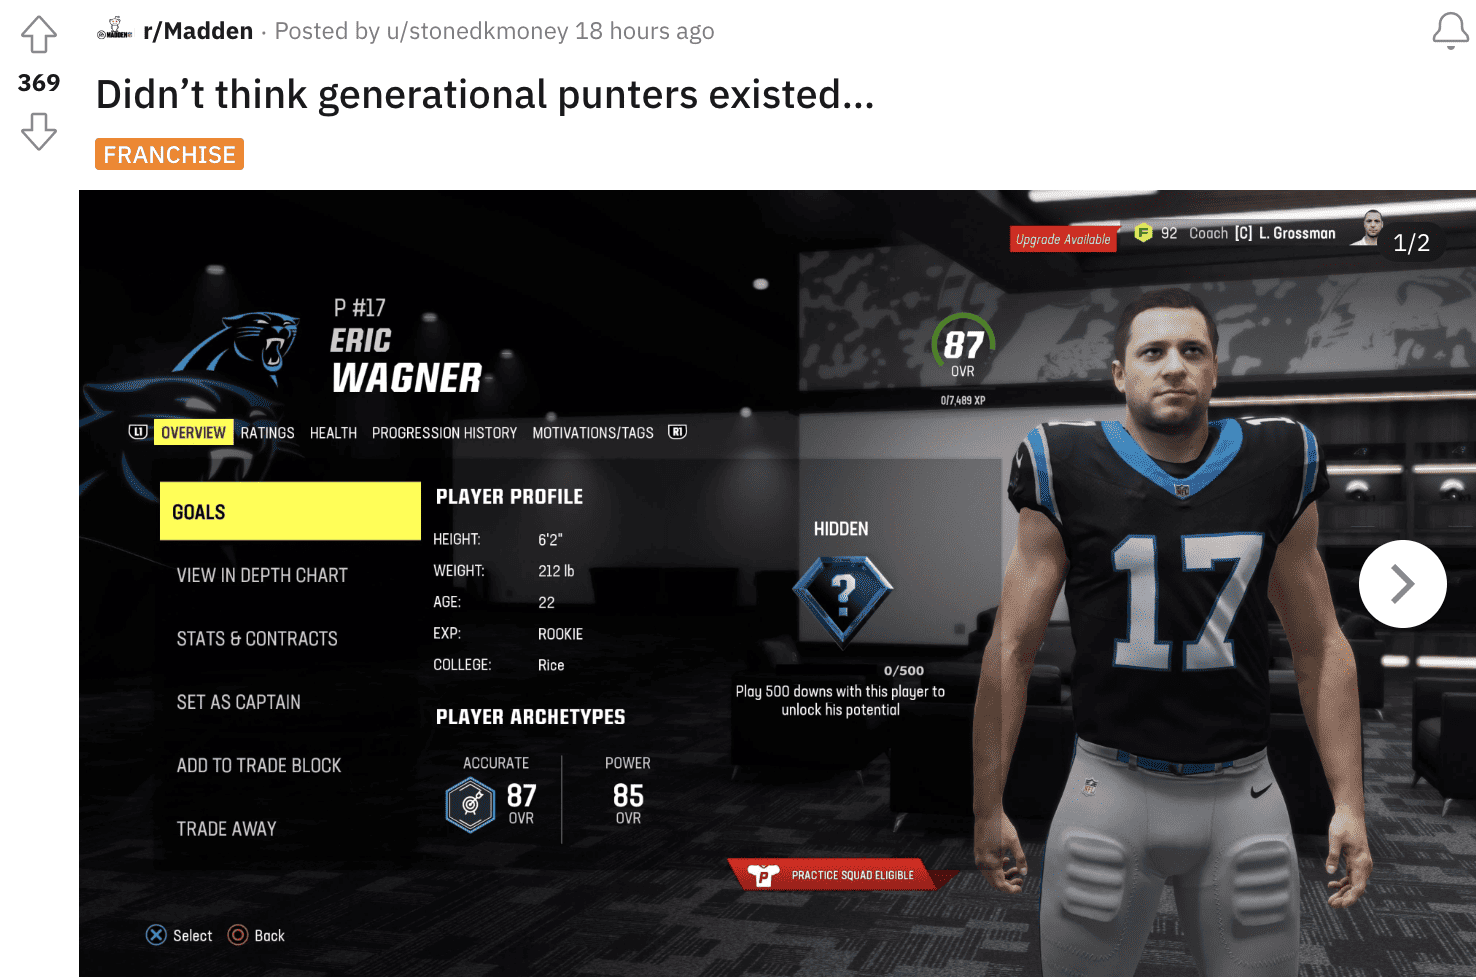 A screenshot of an nfl game featuring a Panthers player drafted from Madden 24.